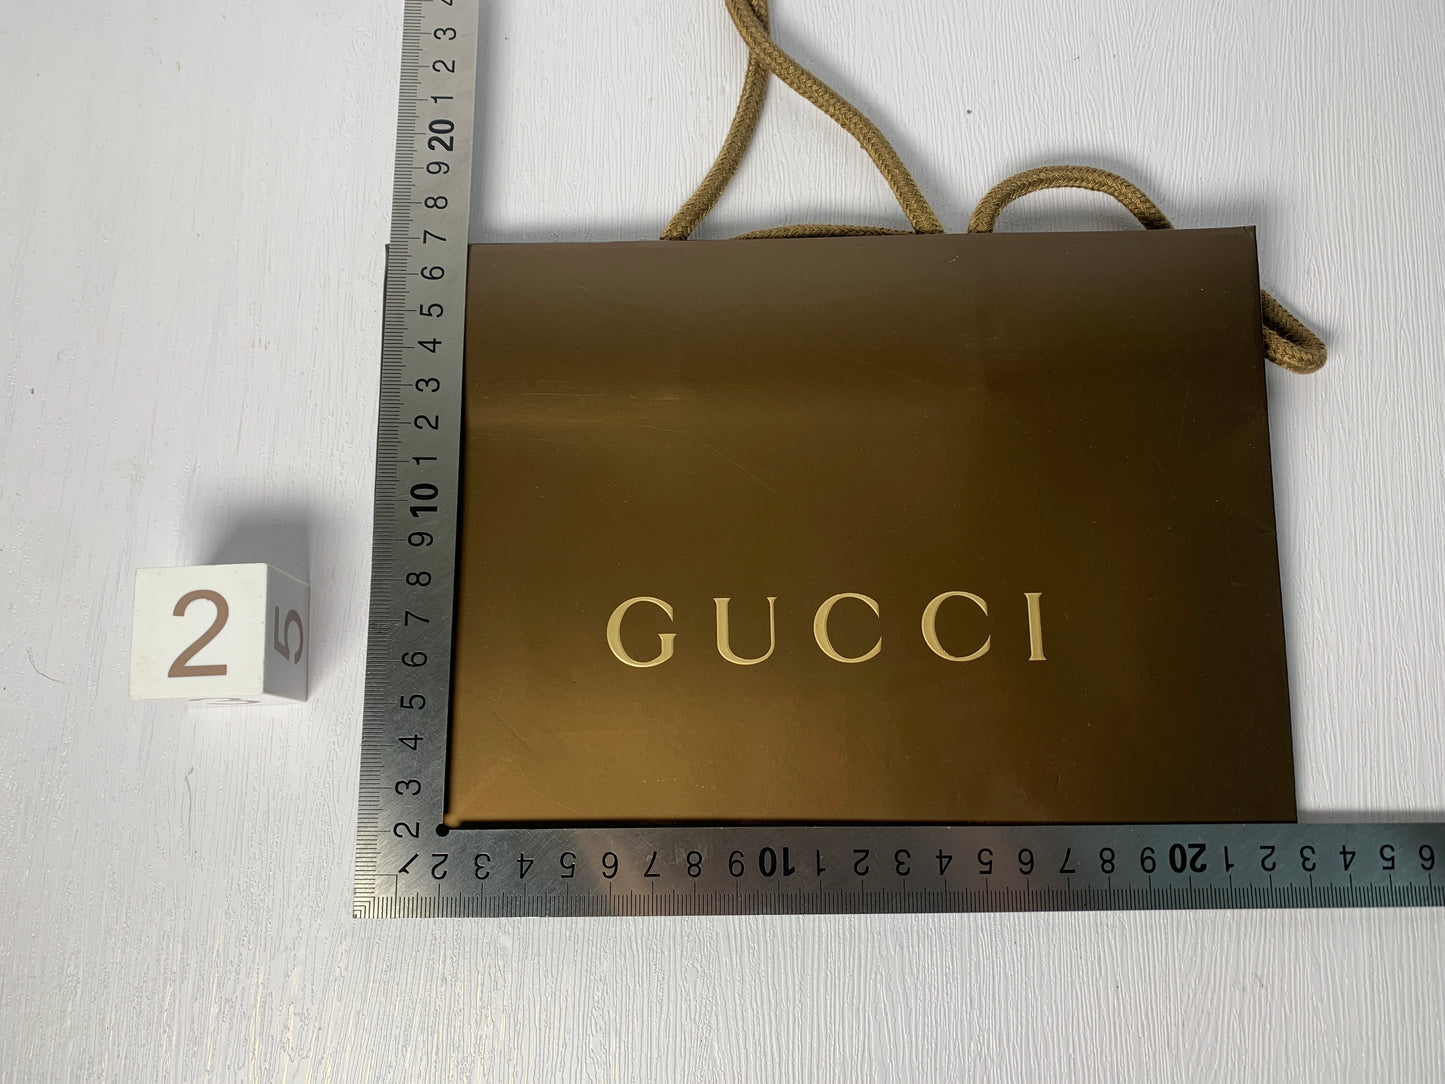 Gucci gift paper bag for wallet handbag jewllery watch jewelly bag